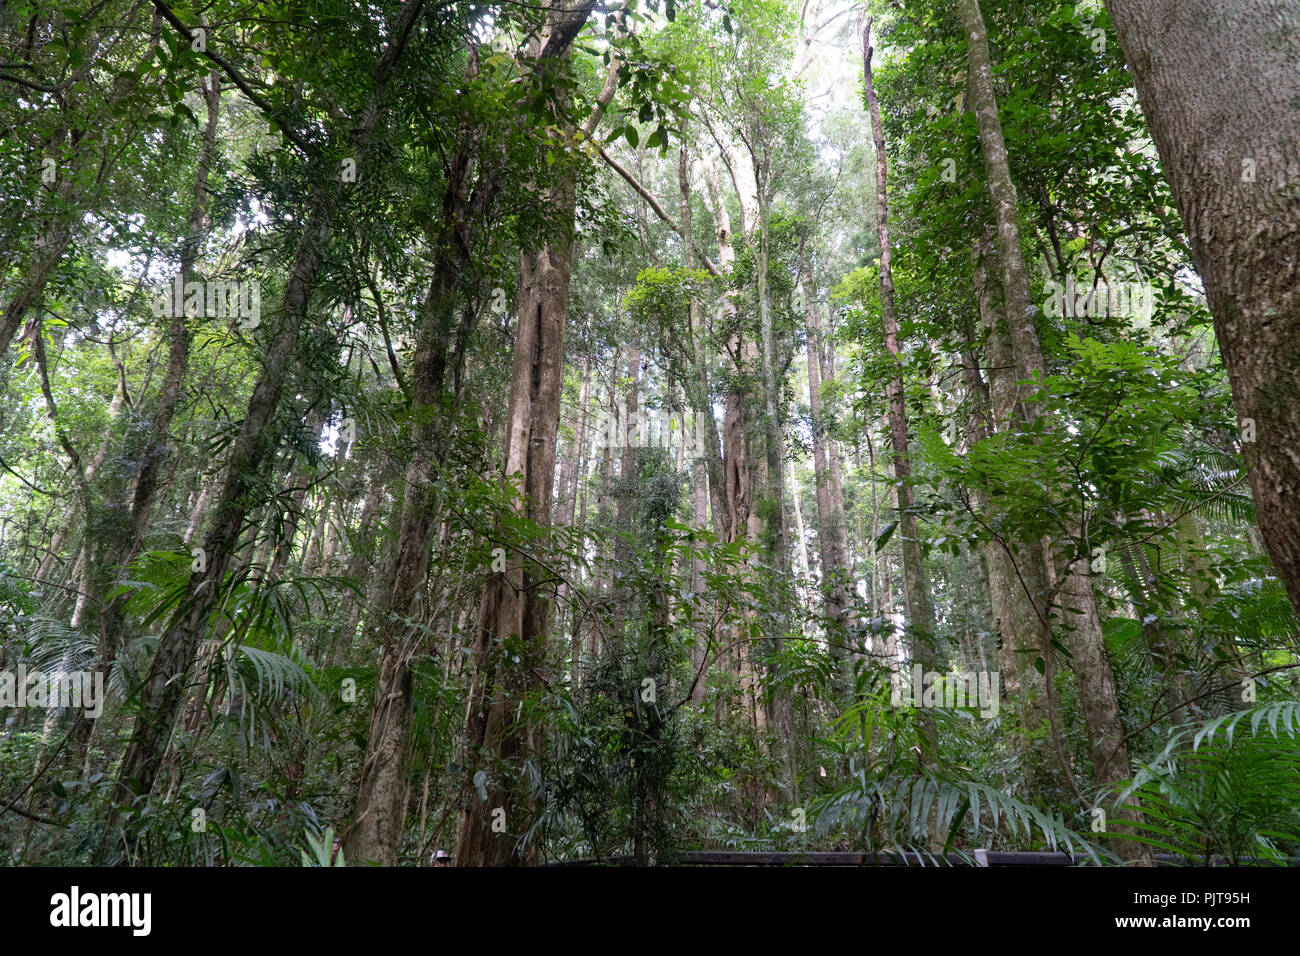 View from below into the treetops of the rainforest in Australia Stock Photo